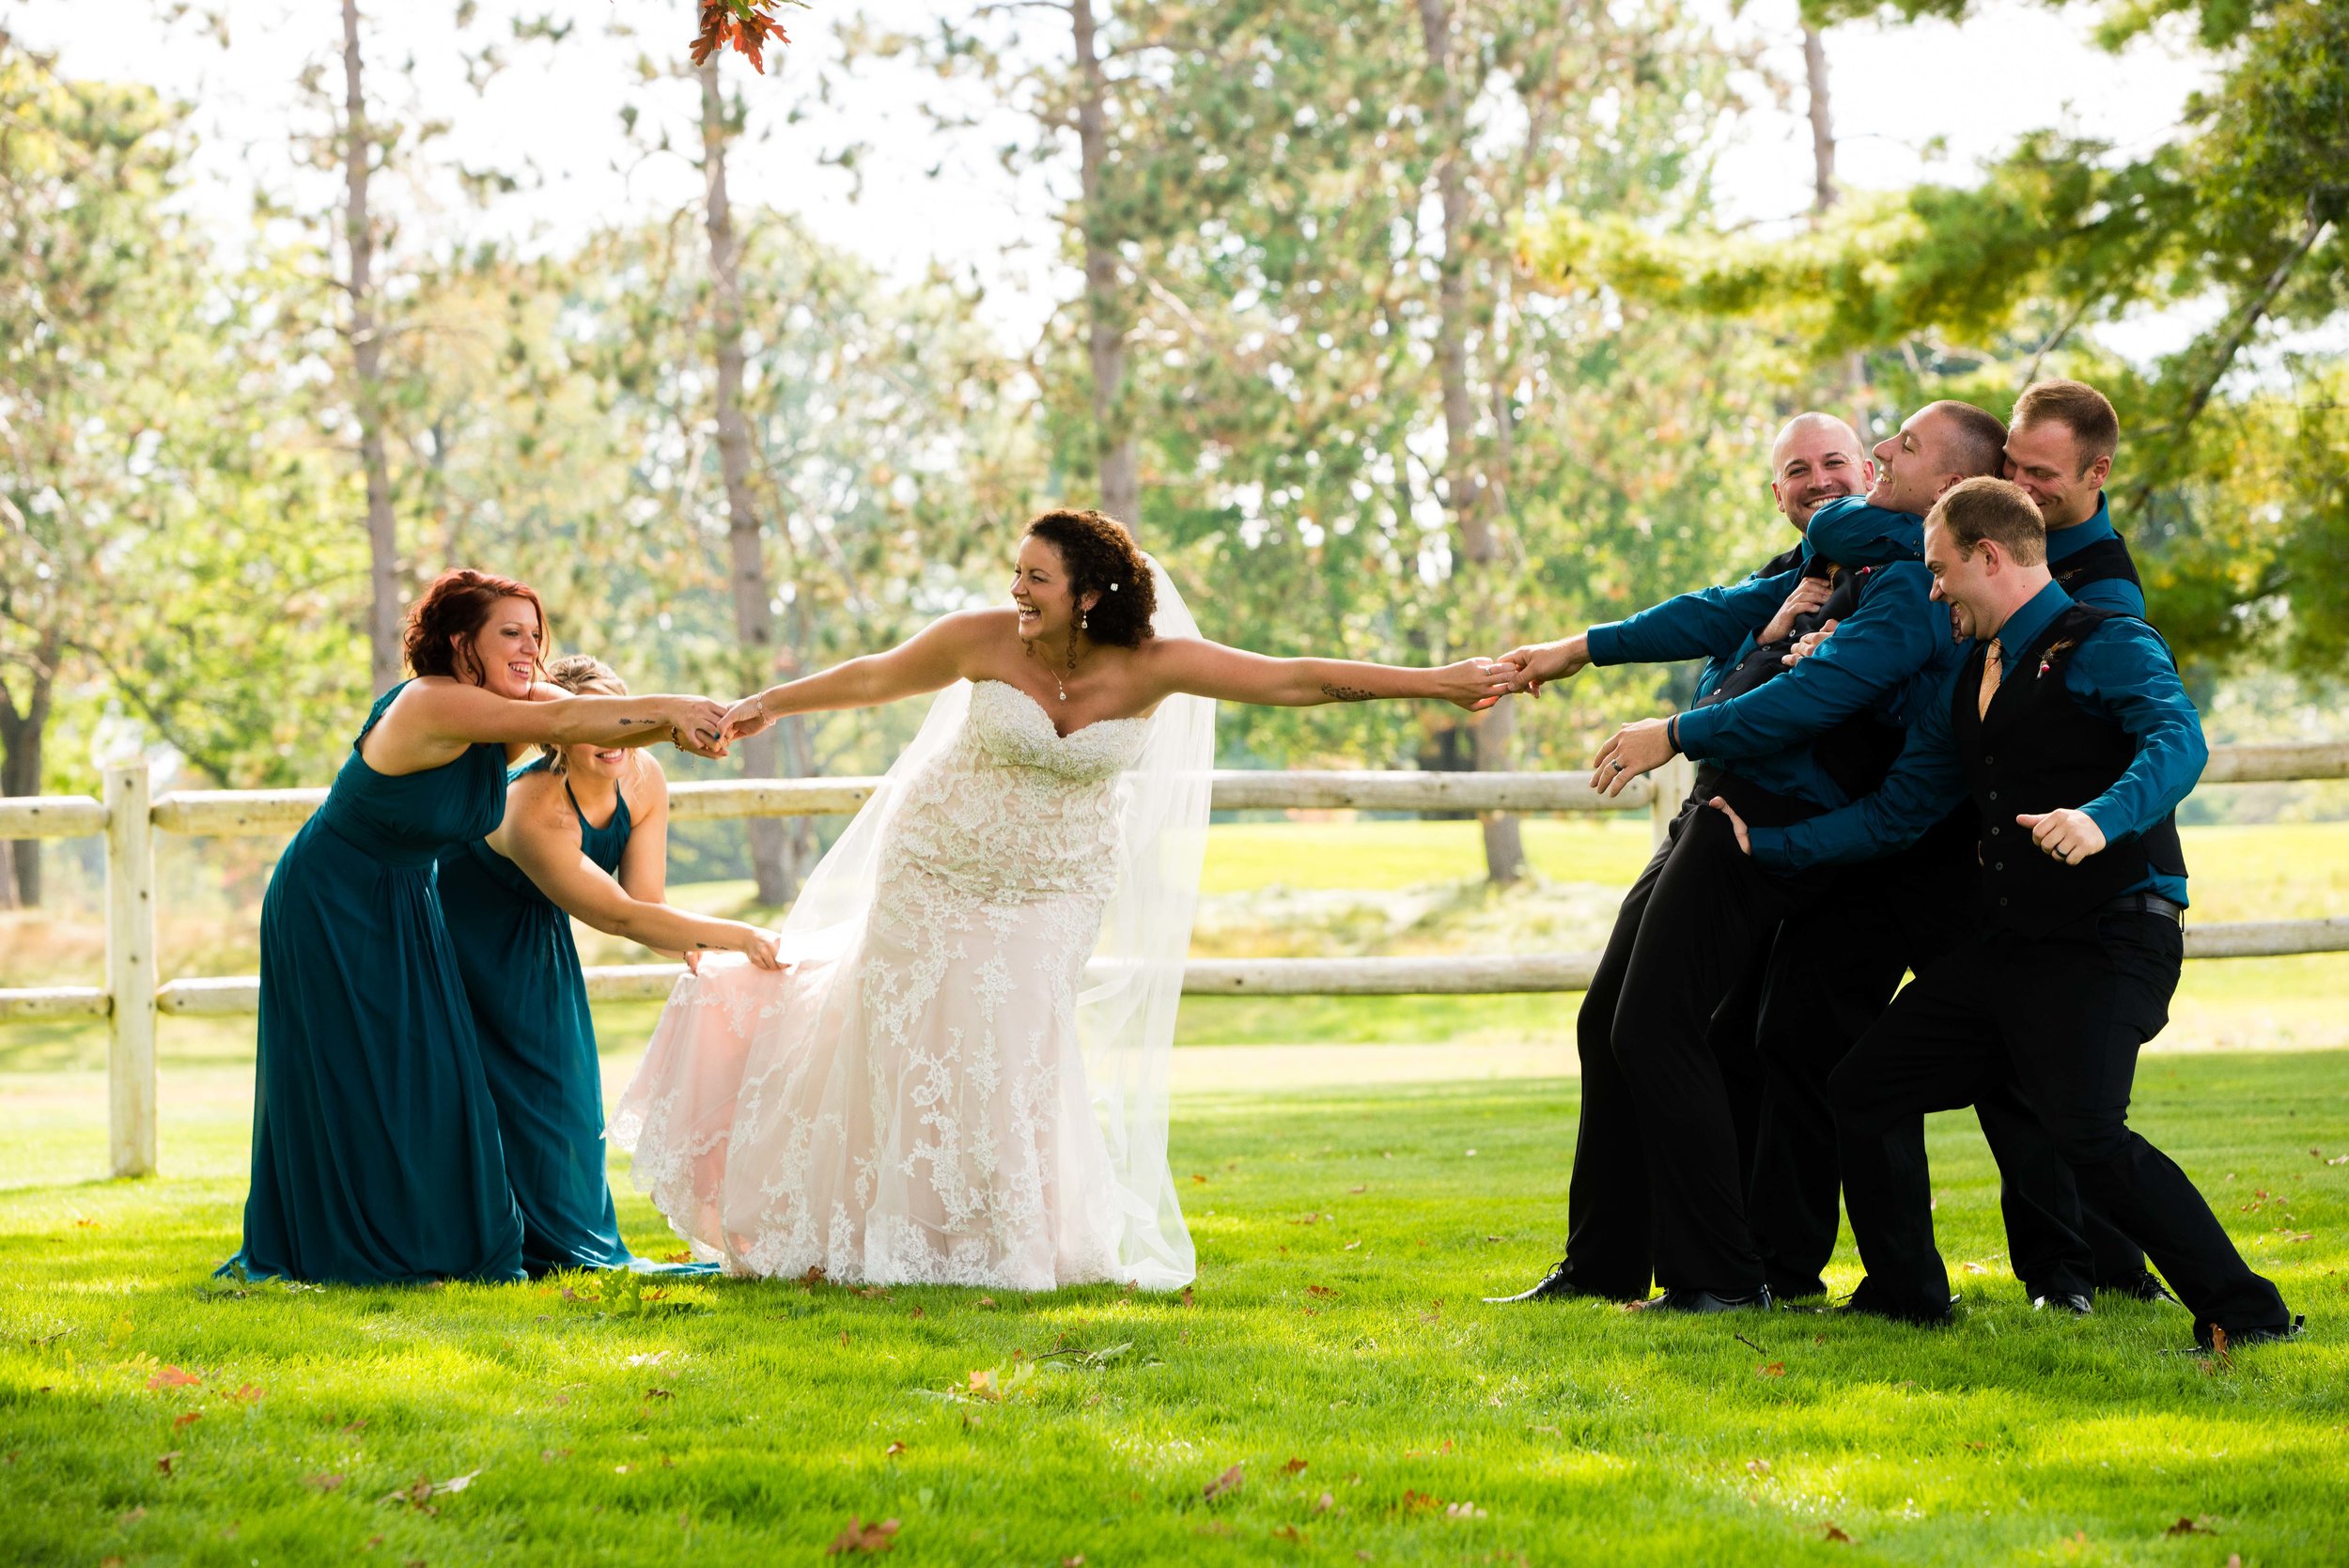 Bride Being Pulled By Husband and Her Friends